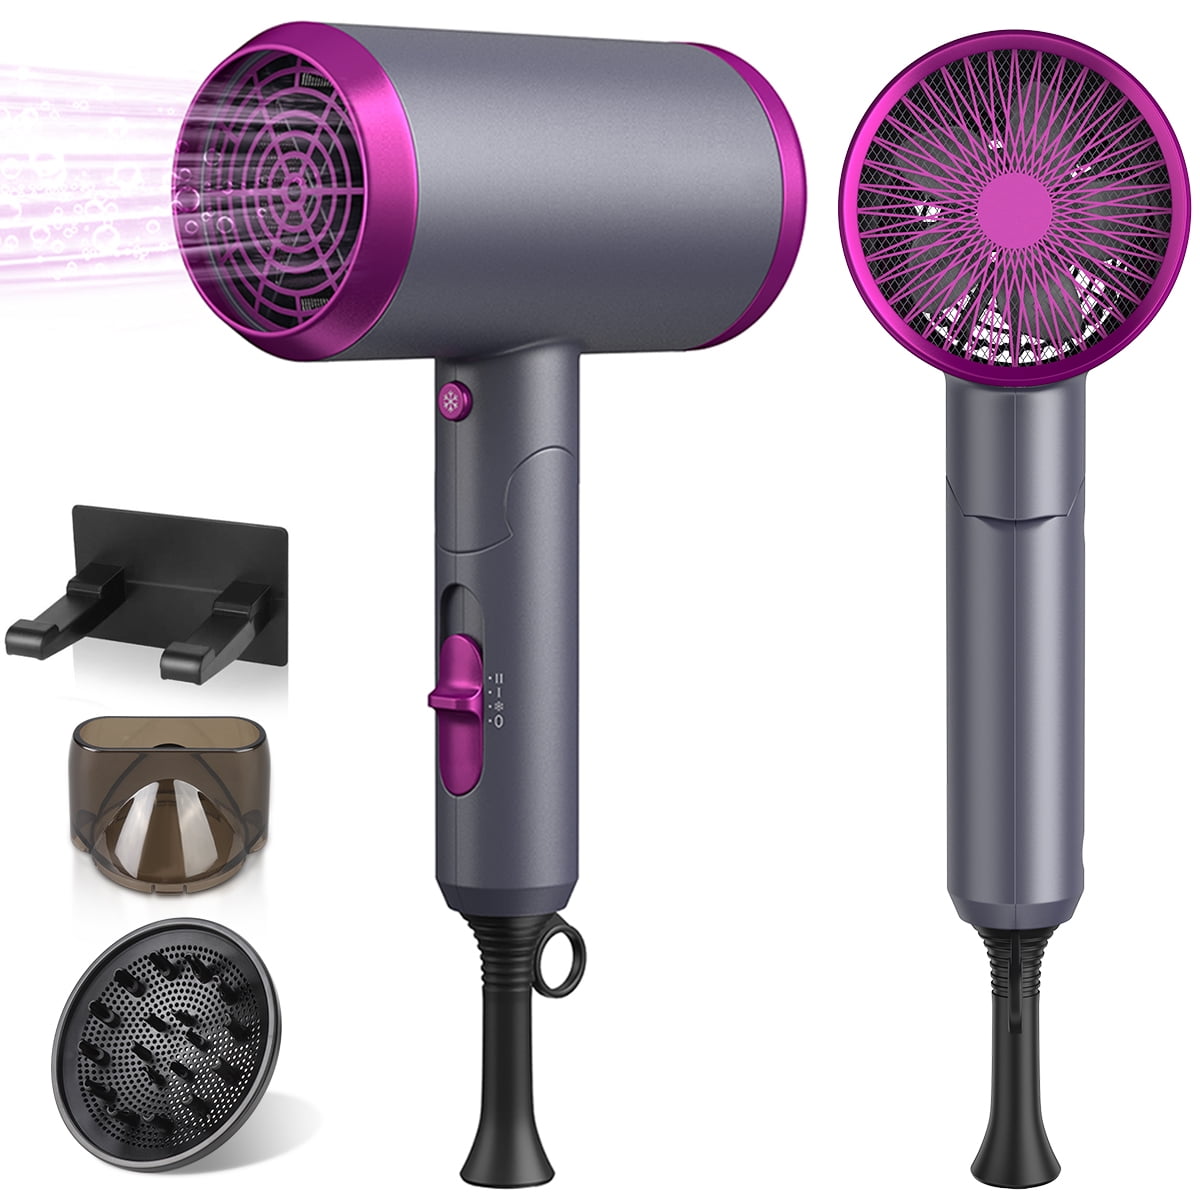 Ionic Hair Dryer Professional 1800W Ion Compact Blow Dryer, Foldable